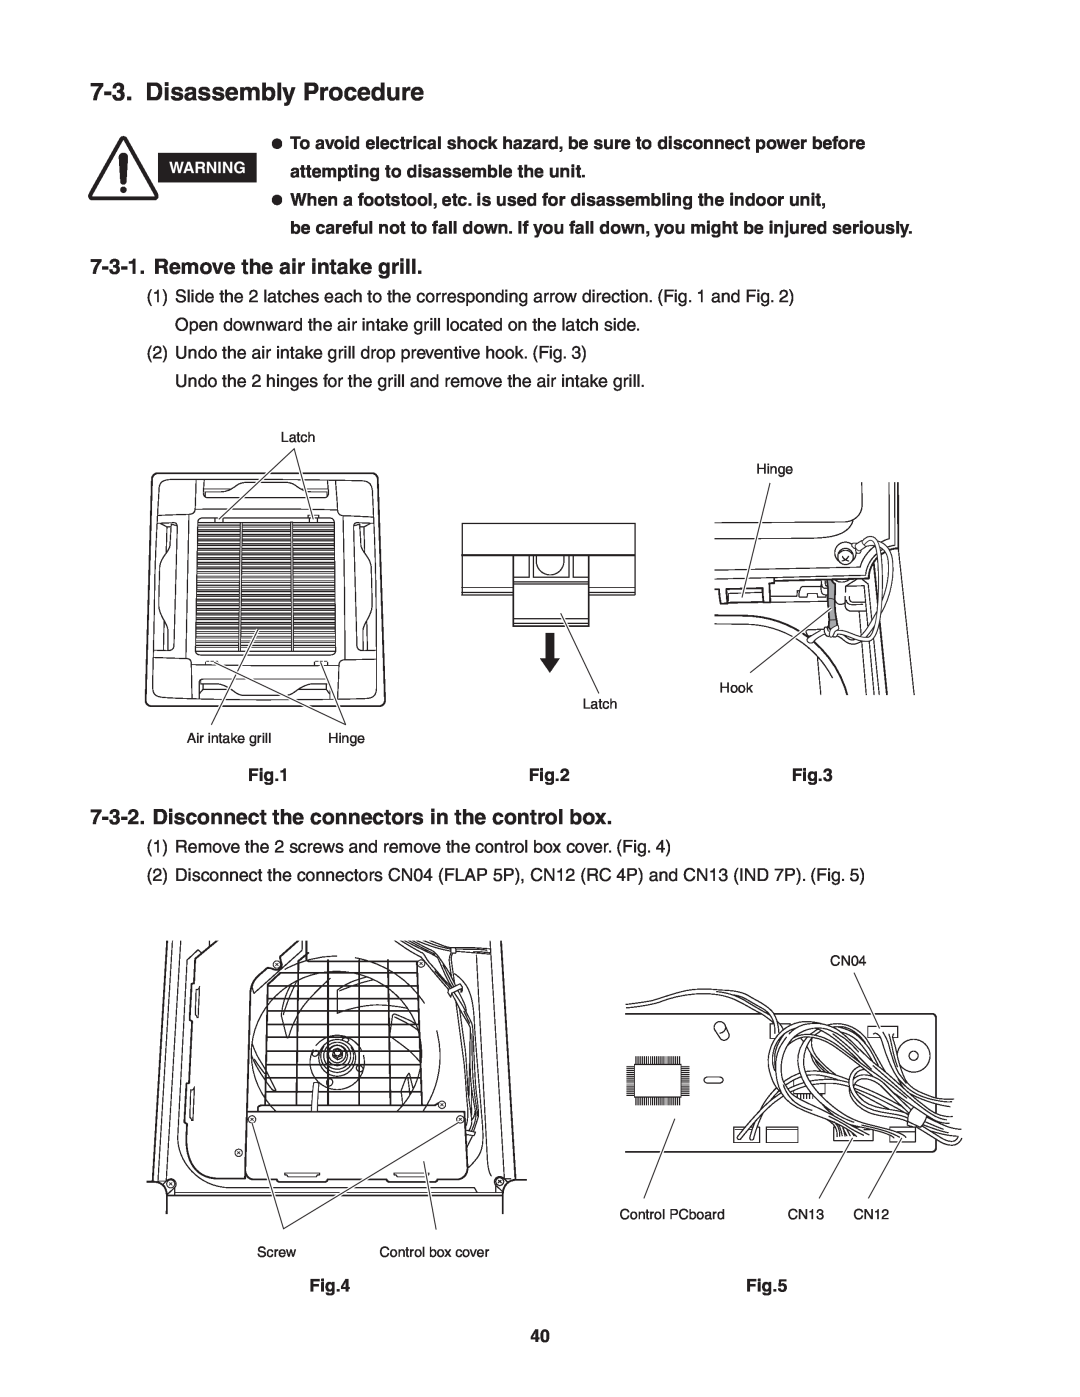 Panasonic CU-KE12NK1, CU-KE18NKU, CS-KE18NB4UW, CS-KE12NB41, CZ-18BT1U Disassembly Procedure, Remove the air intake grill 